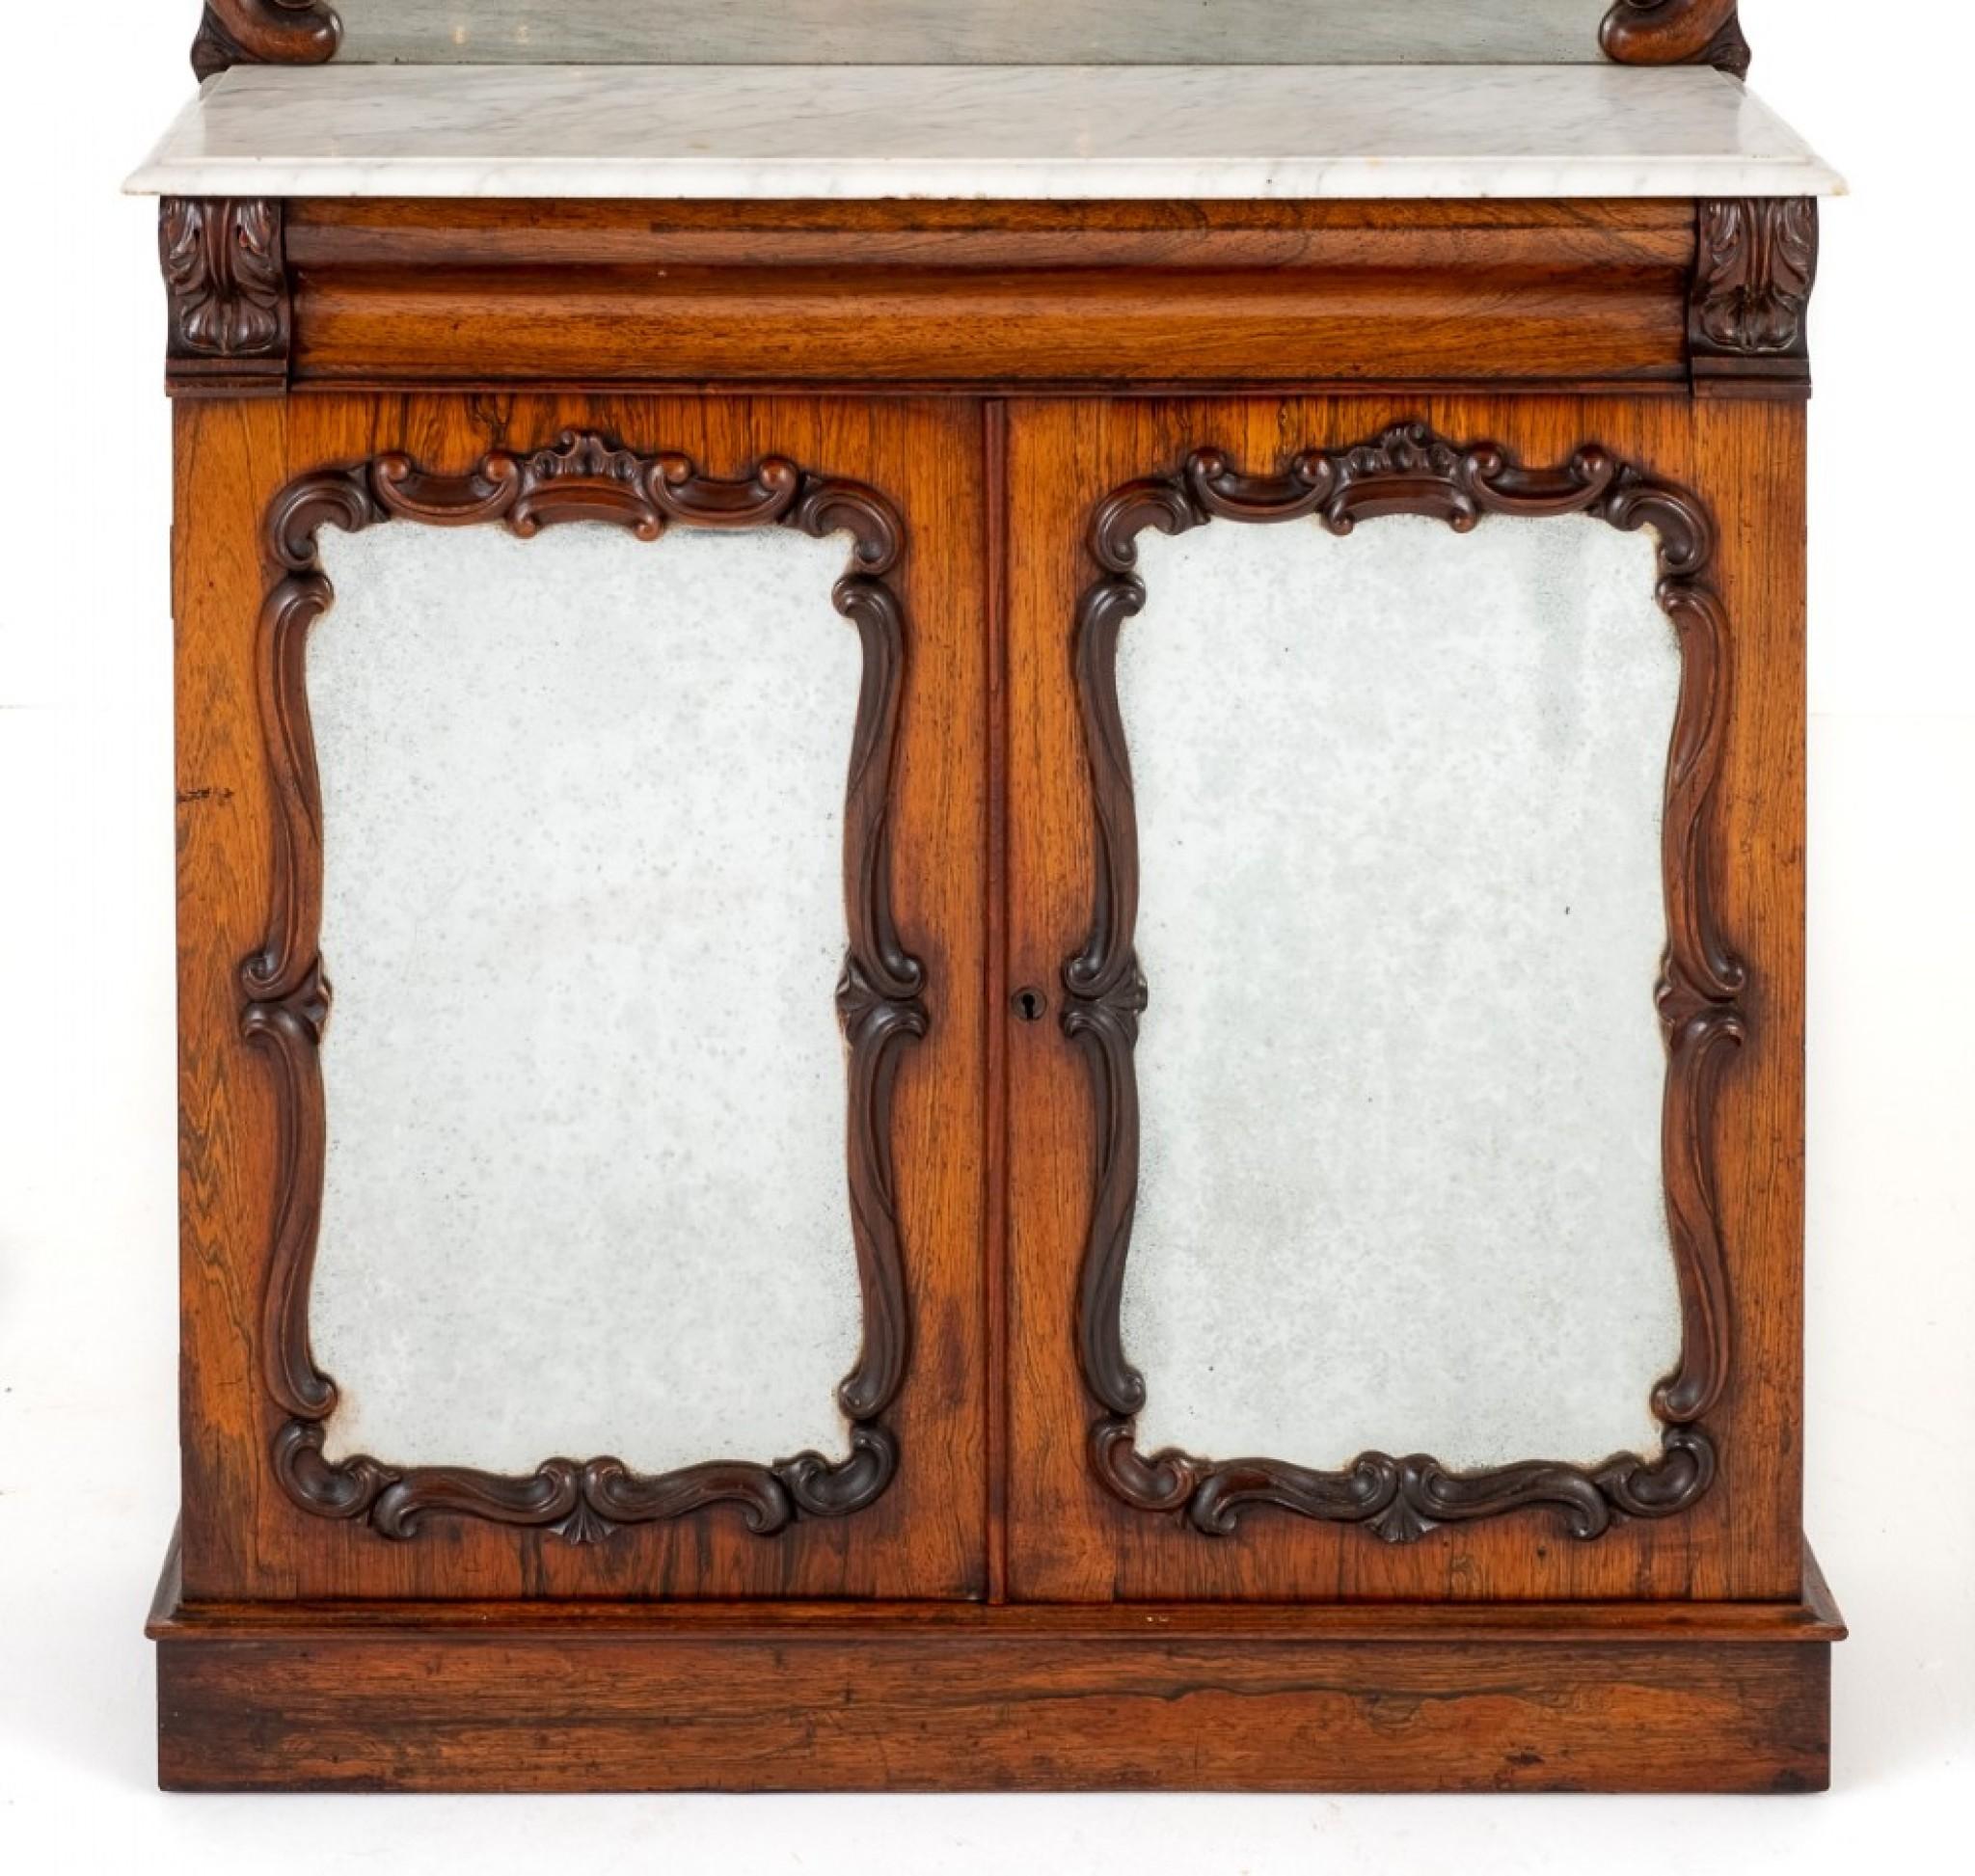 Rosewood marble Top Chiffonier.
Standing Upon a Plinth Base.
Circa 1860
The Lower Doors Being of a Mirrored Form with Carved Decorations.
The Doors Open to Reveal 1 Interior Shelf.
Above the Doors there is a Mahogany Lined Shaped Drawer.
The